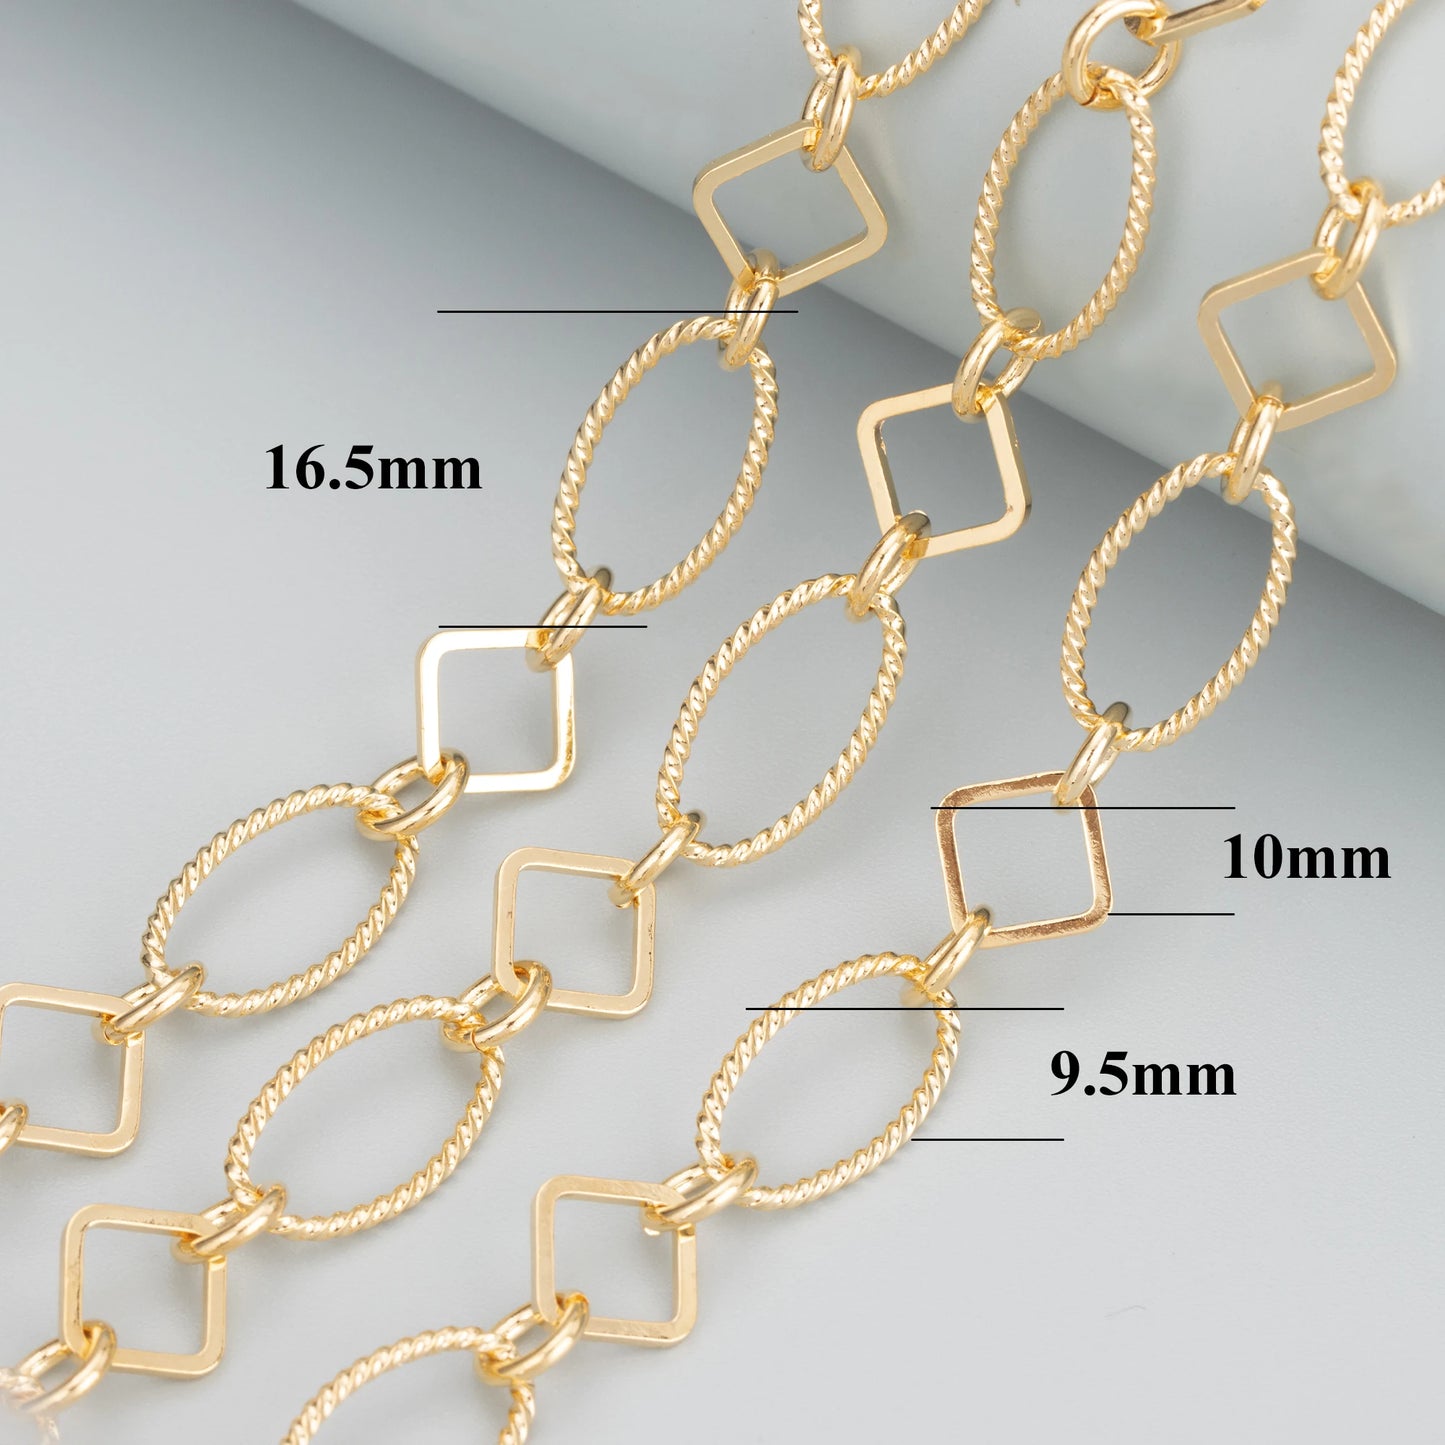 GUFEATHER C54,diy chain,jewelry accessories,pass REACH,nickel free,18k gold plated,,copper,diy necklace,jewelry making,1m/lot